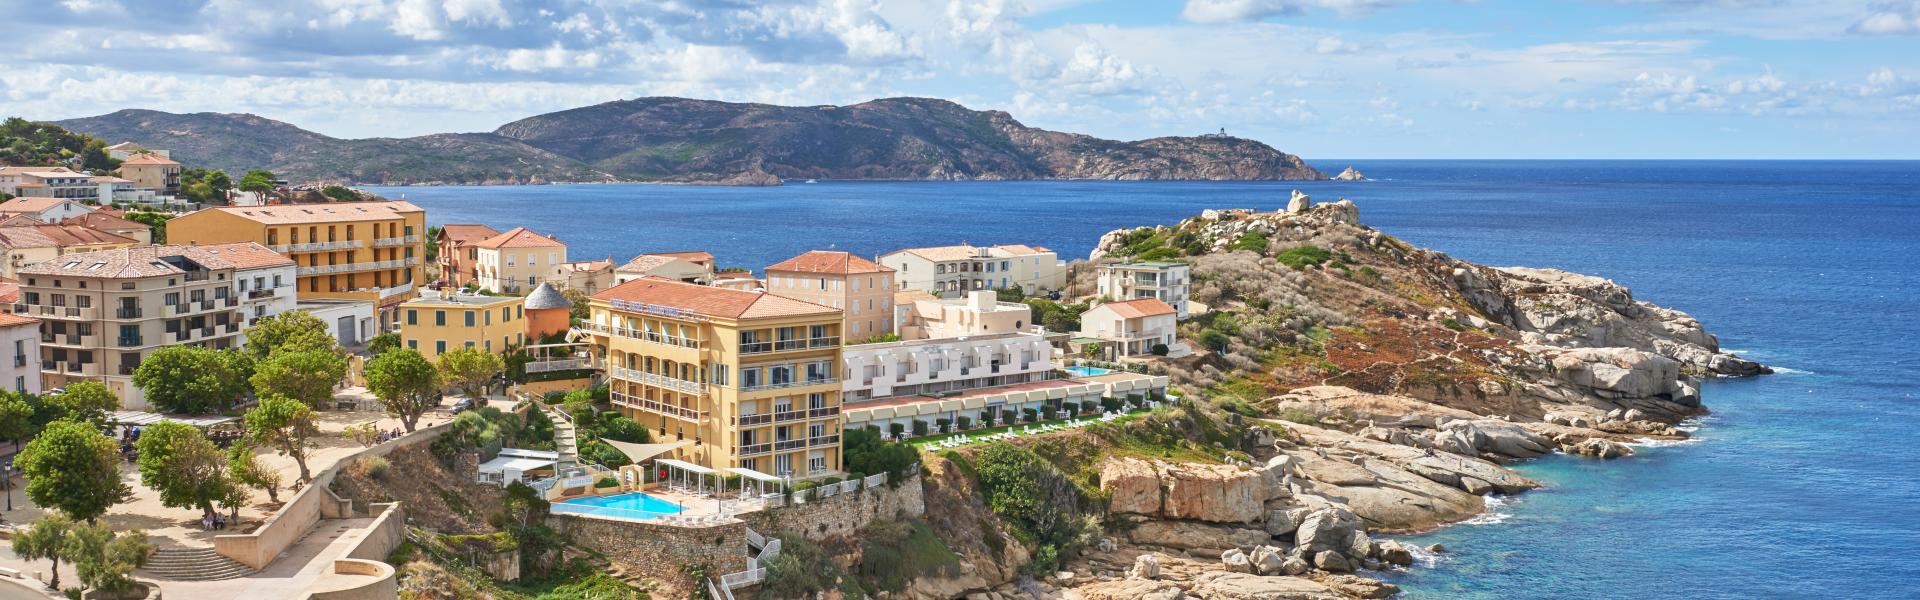 Find the perfect accommodation for your holiday in Calvi - Casamundo